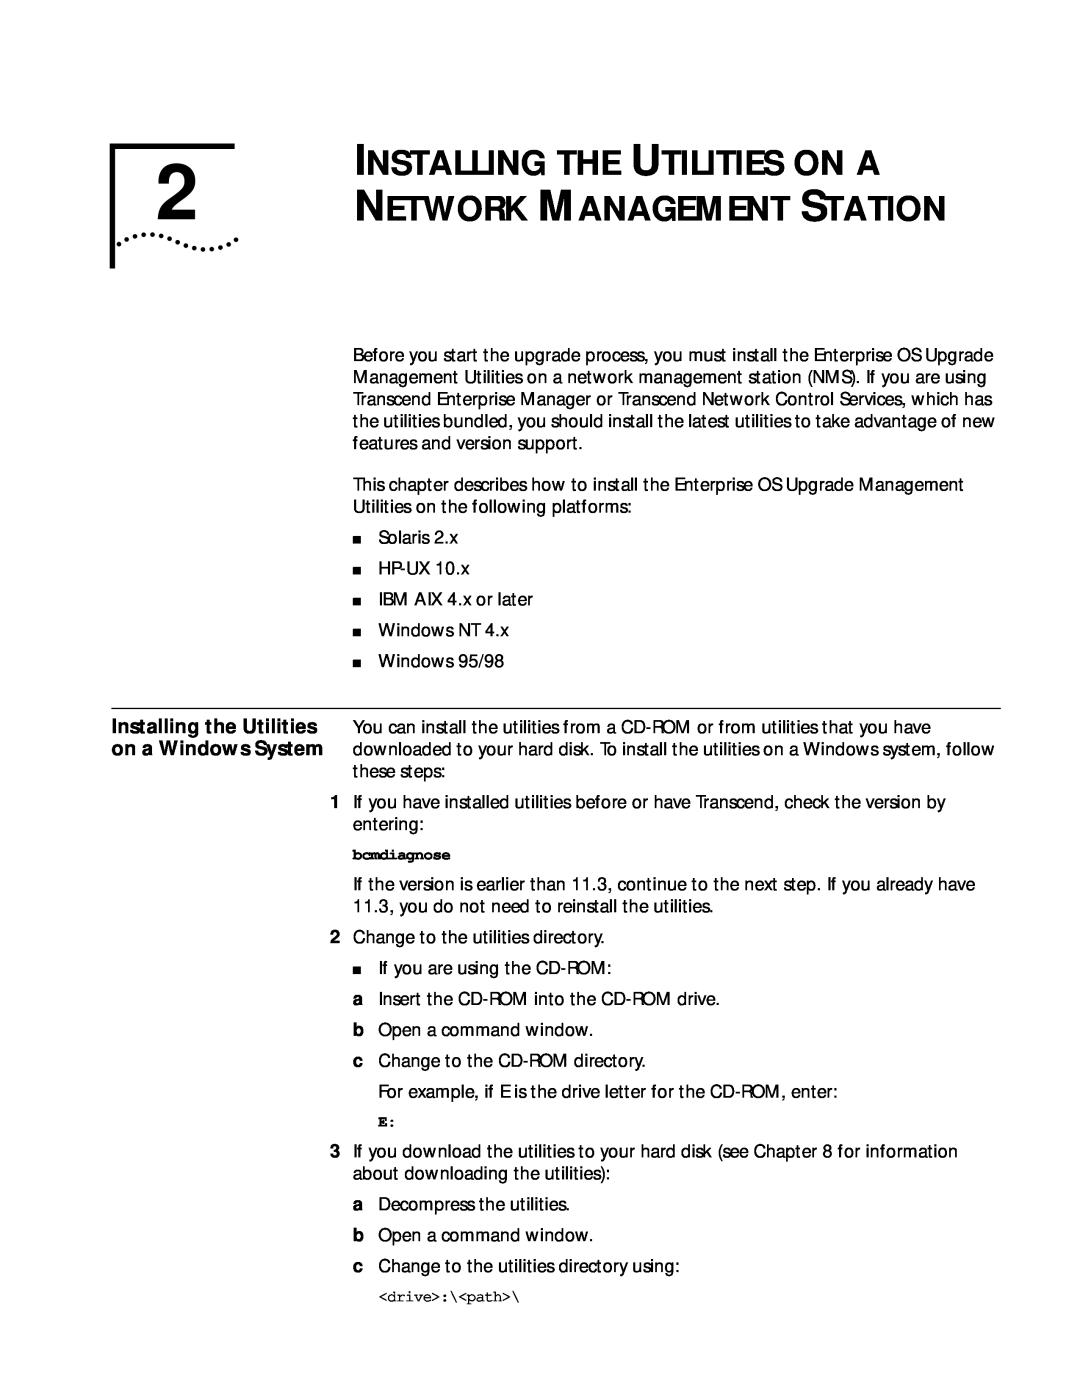 3Com ENTERPRISE OS 11.3 manual INSTALLING THE UTILITIES ON A 2 NETWORK MANAGEMENT STATION, bcmdiagnose 